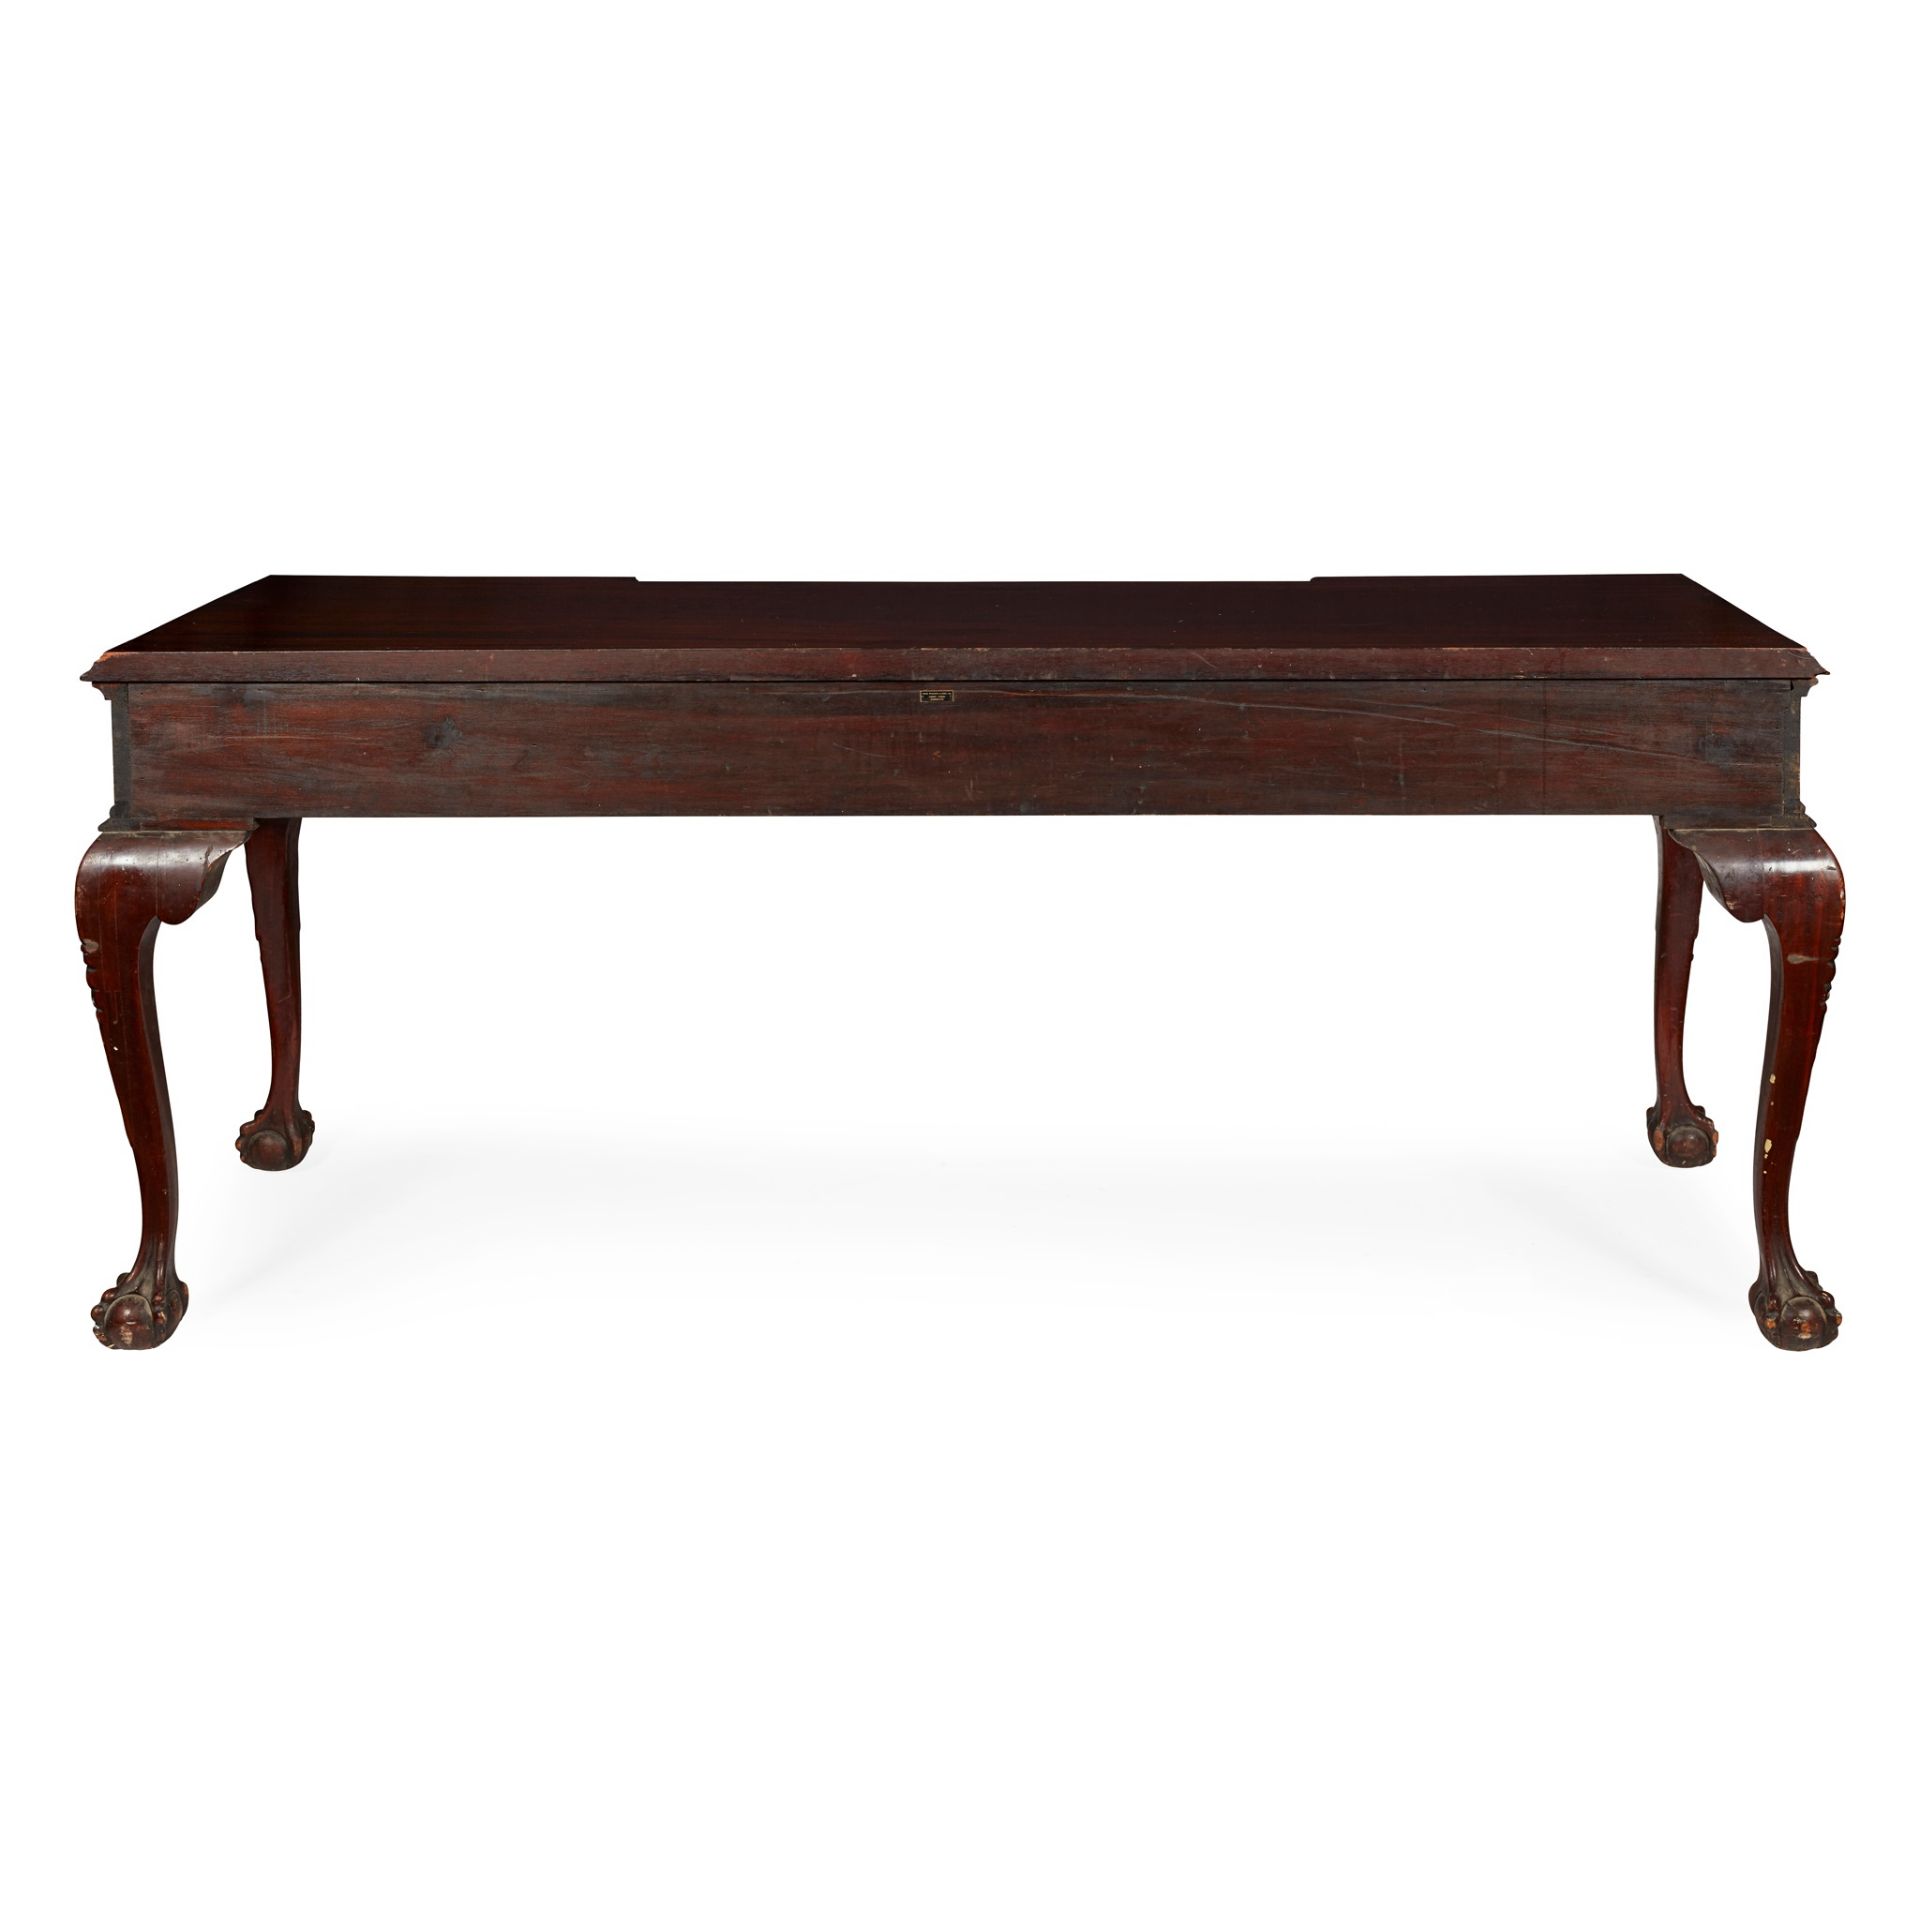 GEORGE II STYLE LARGE MAHOGANY SERVING TABLE LATE 19TH CENTURY - Image 2 of 2